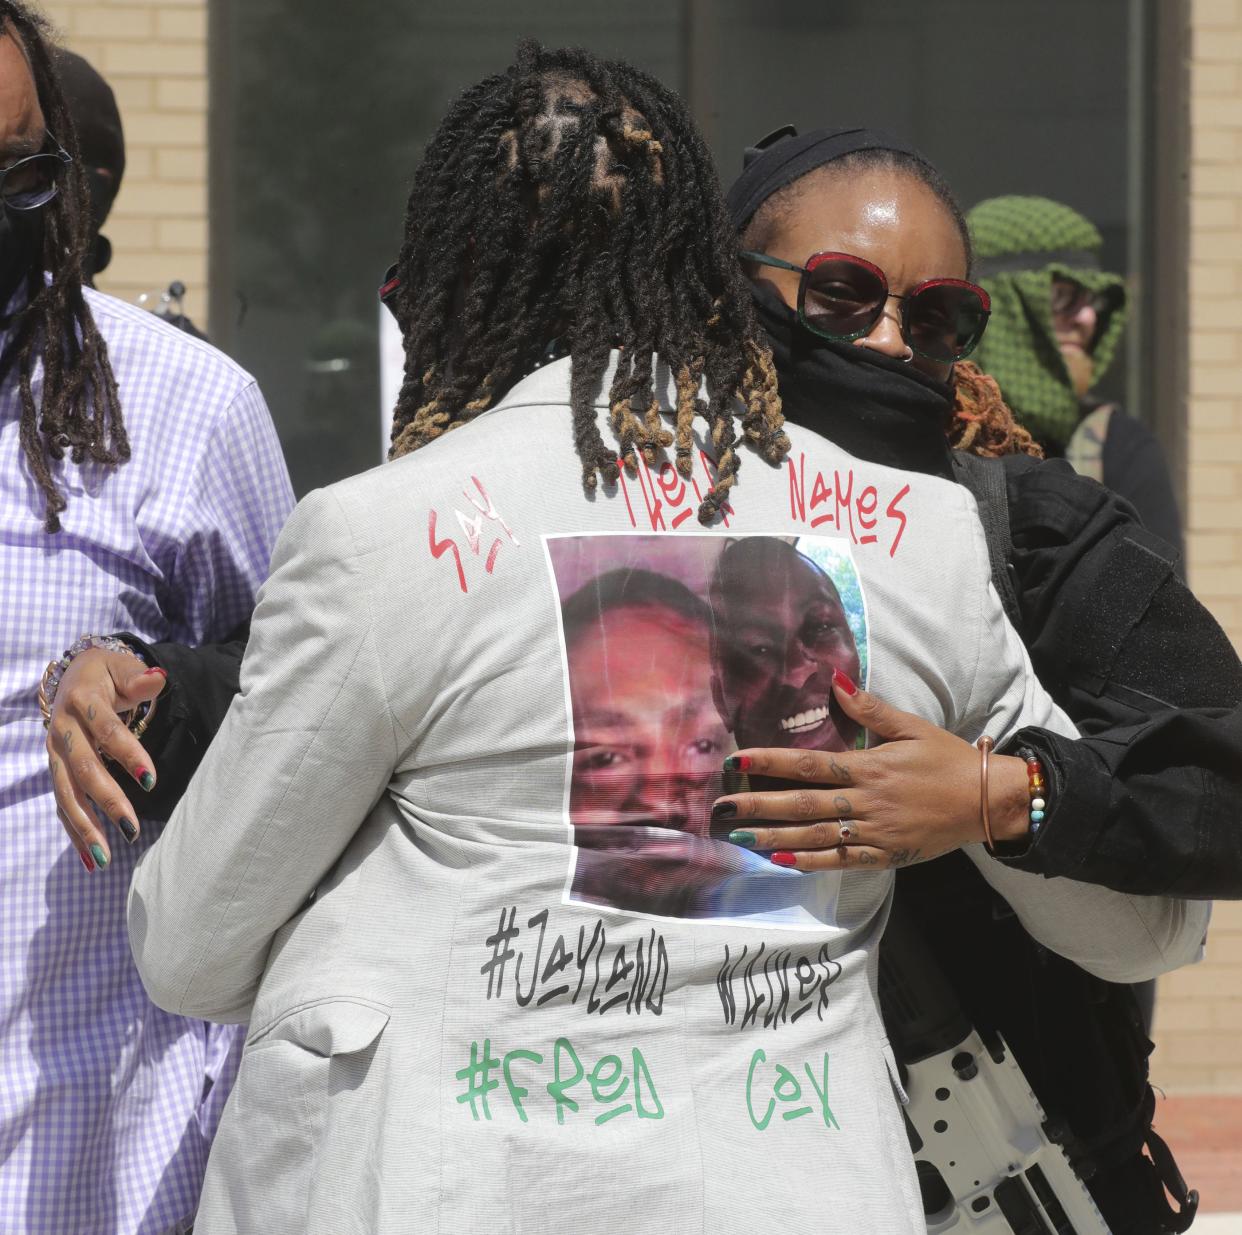 Michael Harris, left, is greeted as he arrives at the calling hours and funeral for Jayland Walker at the Civic Theatre on Wednesday, July 13, 2022 in Akron, Ohio.